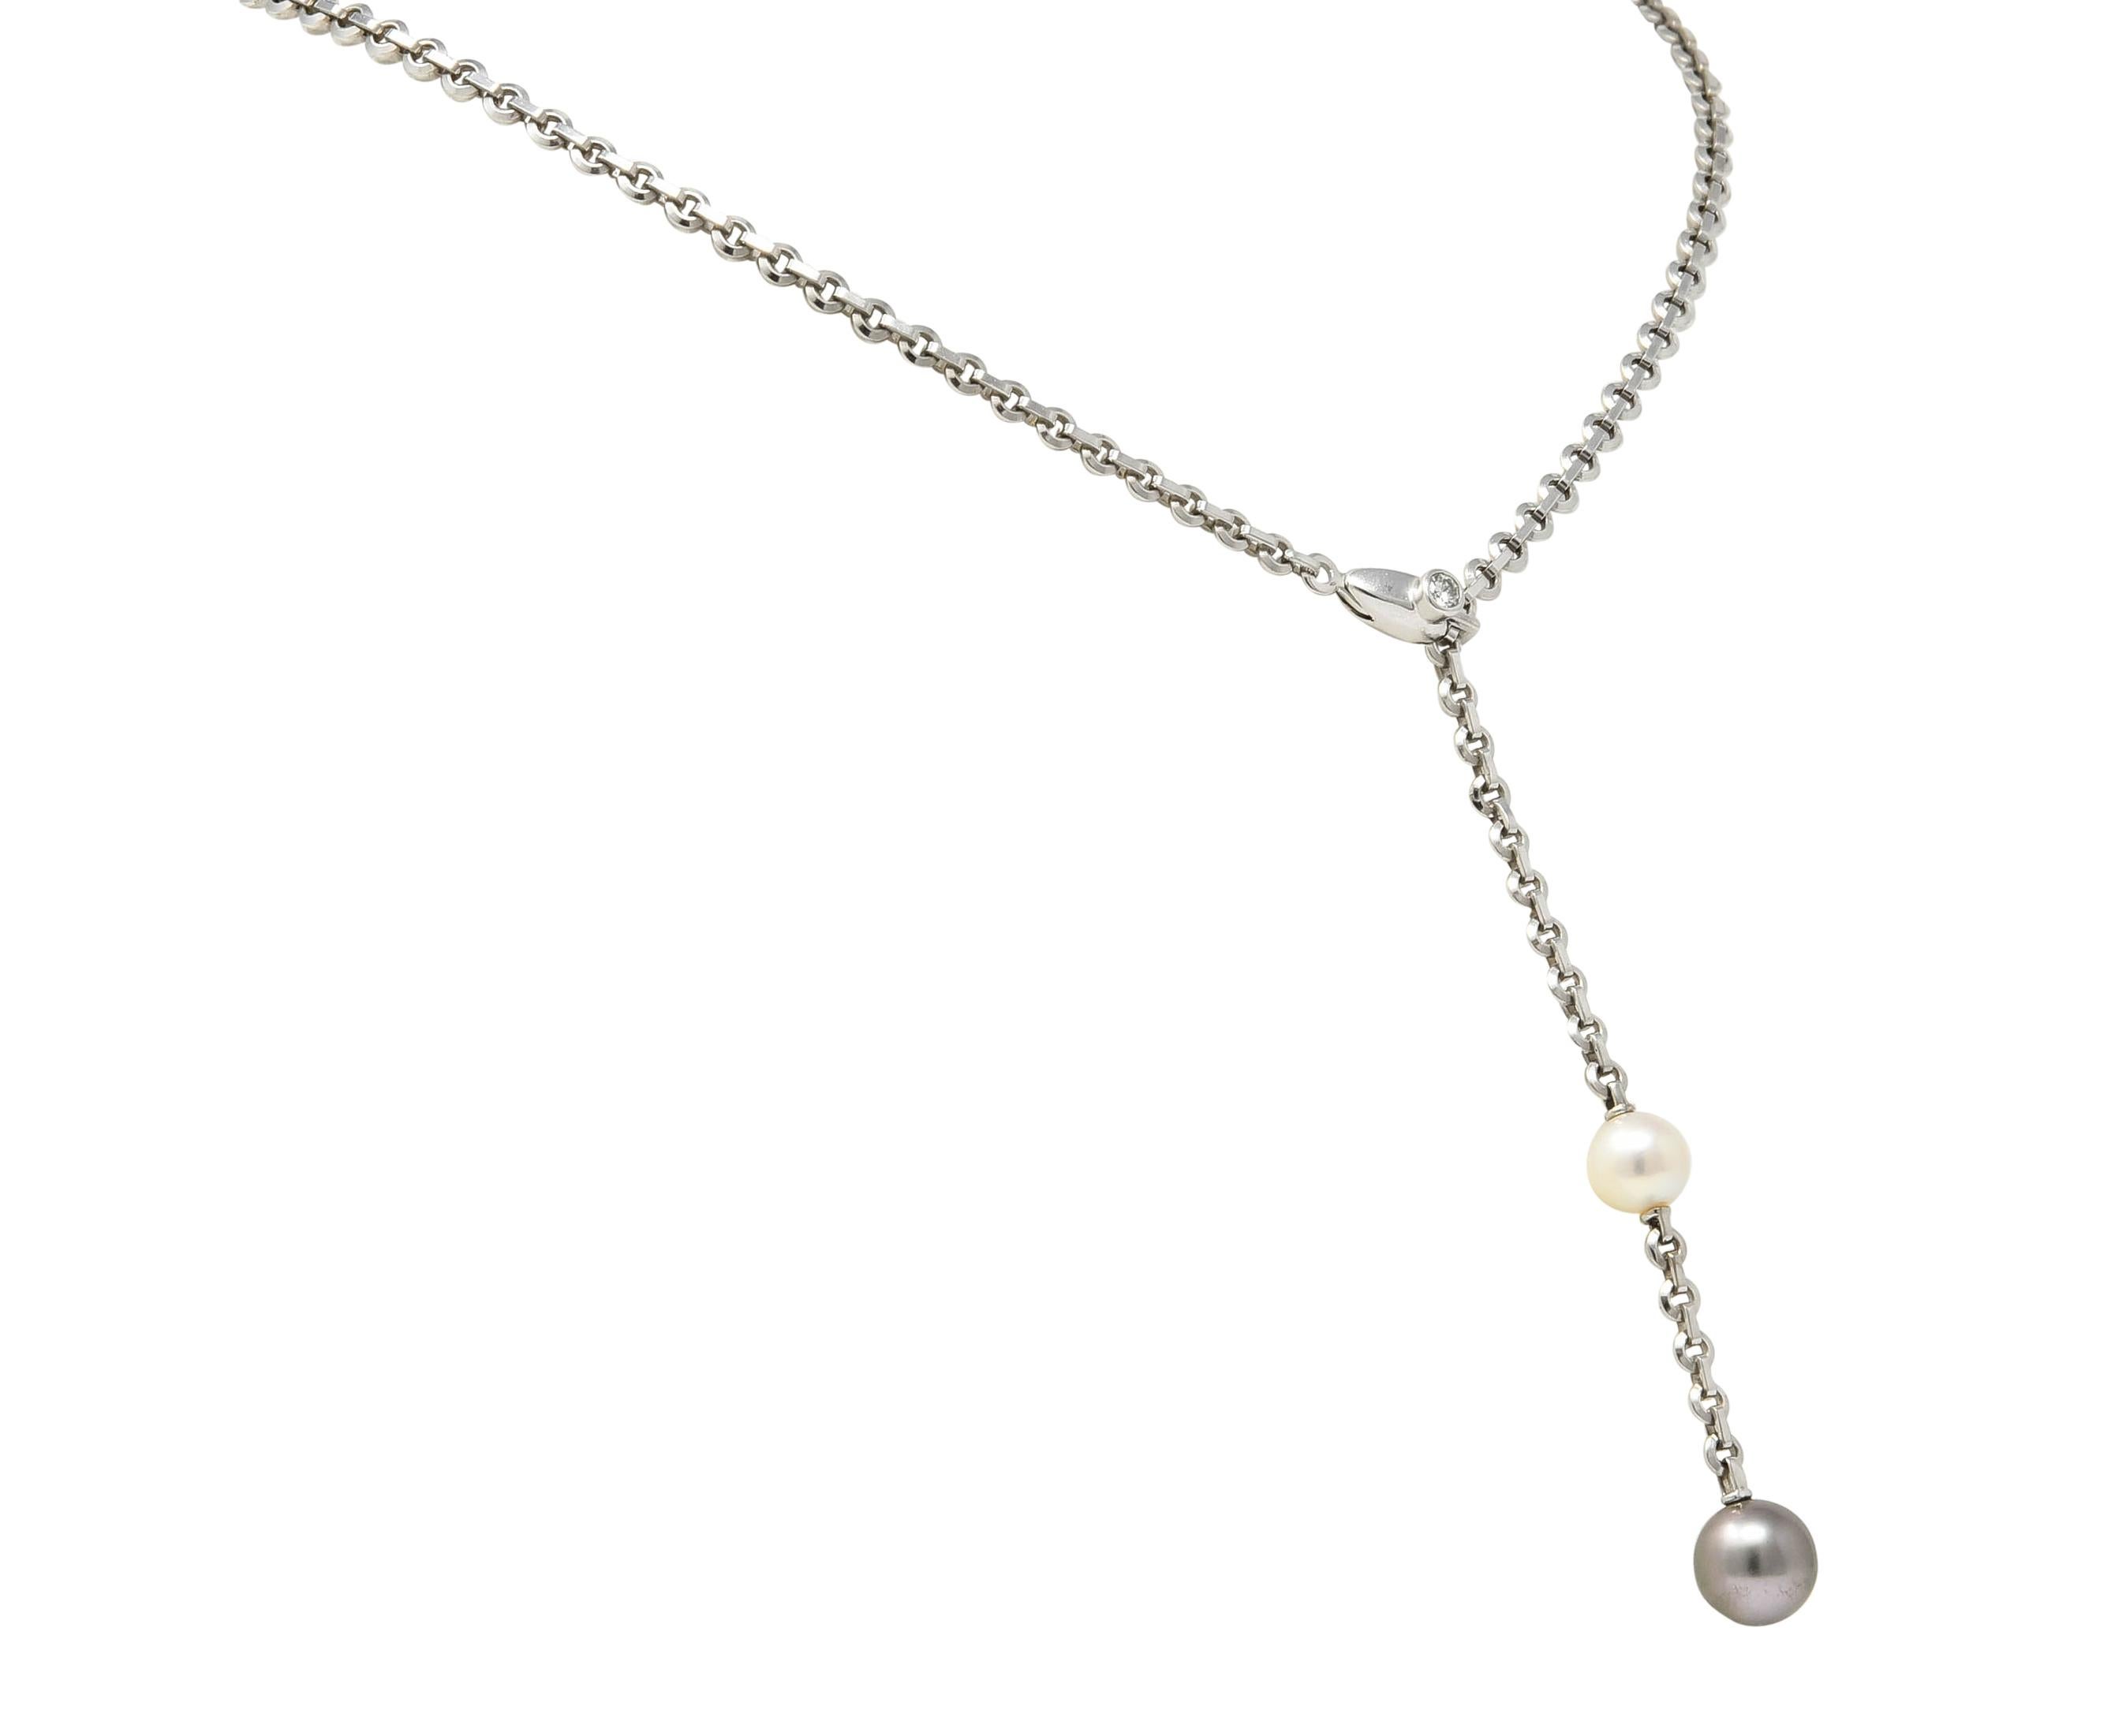 Stylized white gold box chain lariat style necklace terminating on one end in two round cultured pearls measuring approximately 7.3 mm to 8.8 mm

Larger Tahitian pearl is gray in body color with green overtones, smaller pearl is cream in body color